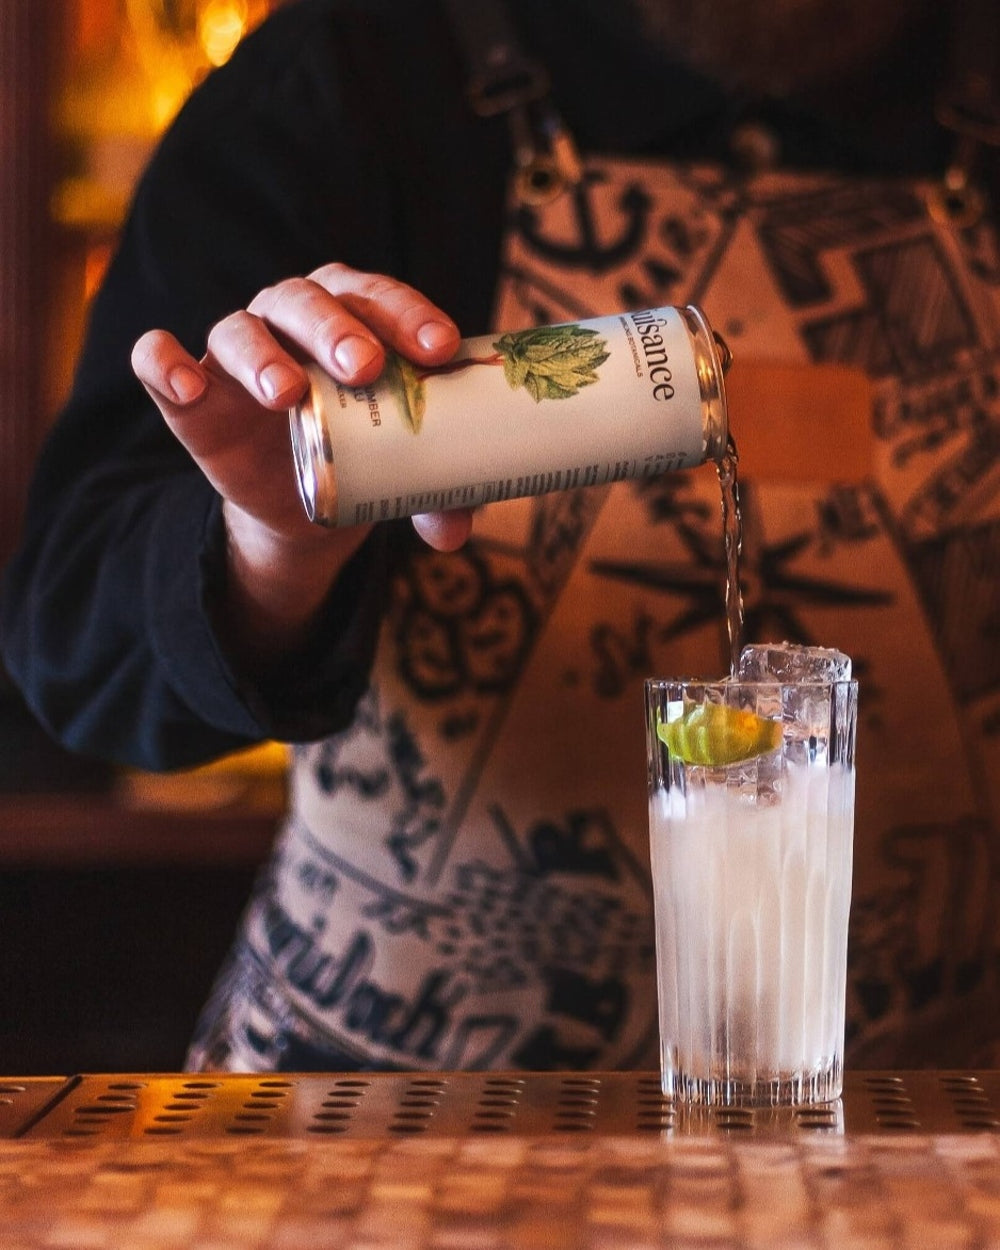 A Cocktail Barman pouring a can of with a can of Premium Mint, Cucumber and Chilli  botanical drink from Scotland-based drinks start-up brand  Nuisance drinks in to a cocktail of Vodka and lime Juice